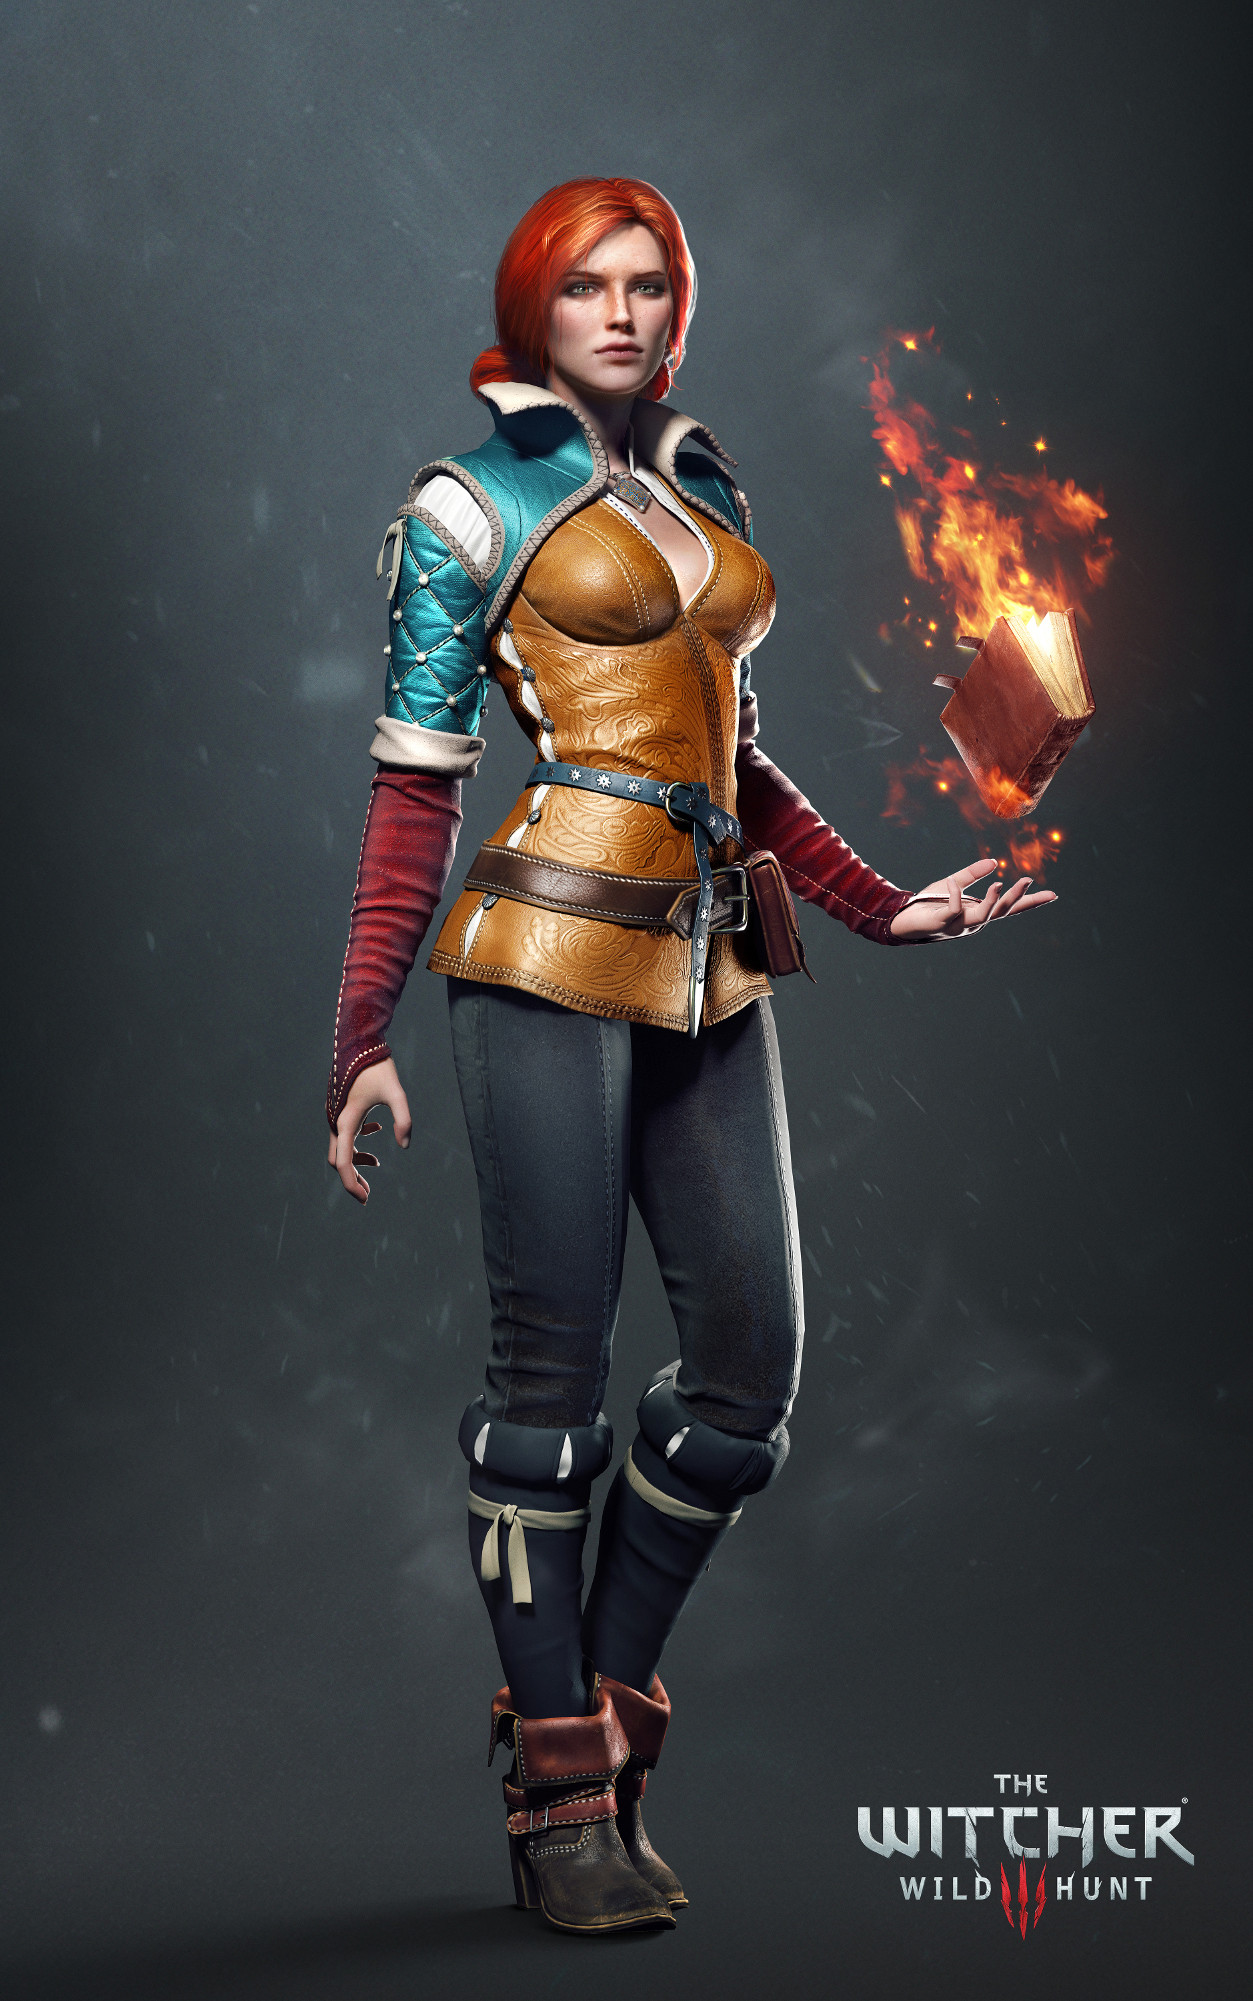 1253x2001 Armor with the nearest resemblance to Triss Merigold's outfit?